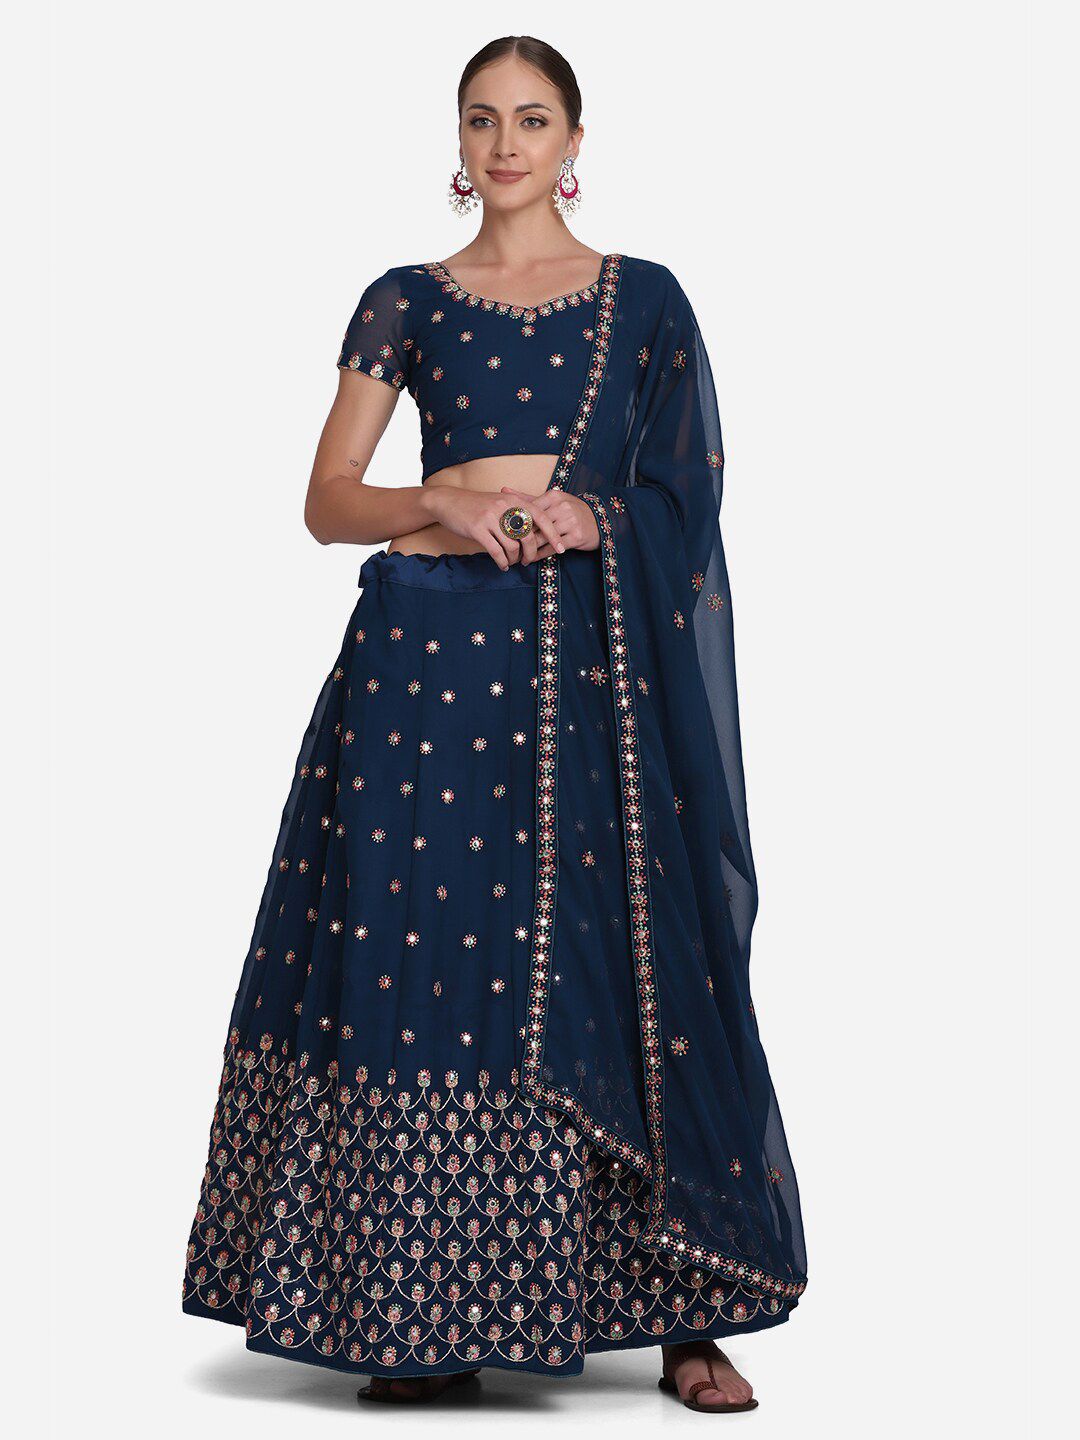 Warthy Ent Teal Blue & Golden Embroidered Semi-Stitched Lehenga Unstitched Blouse Dupatta Price in India